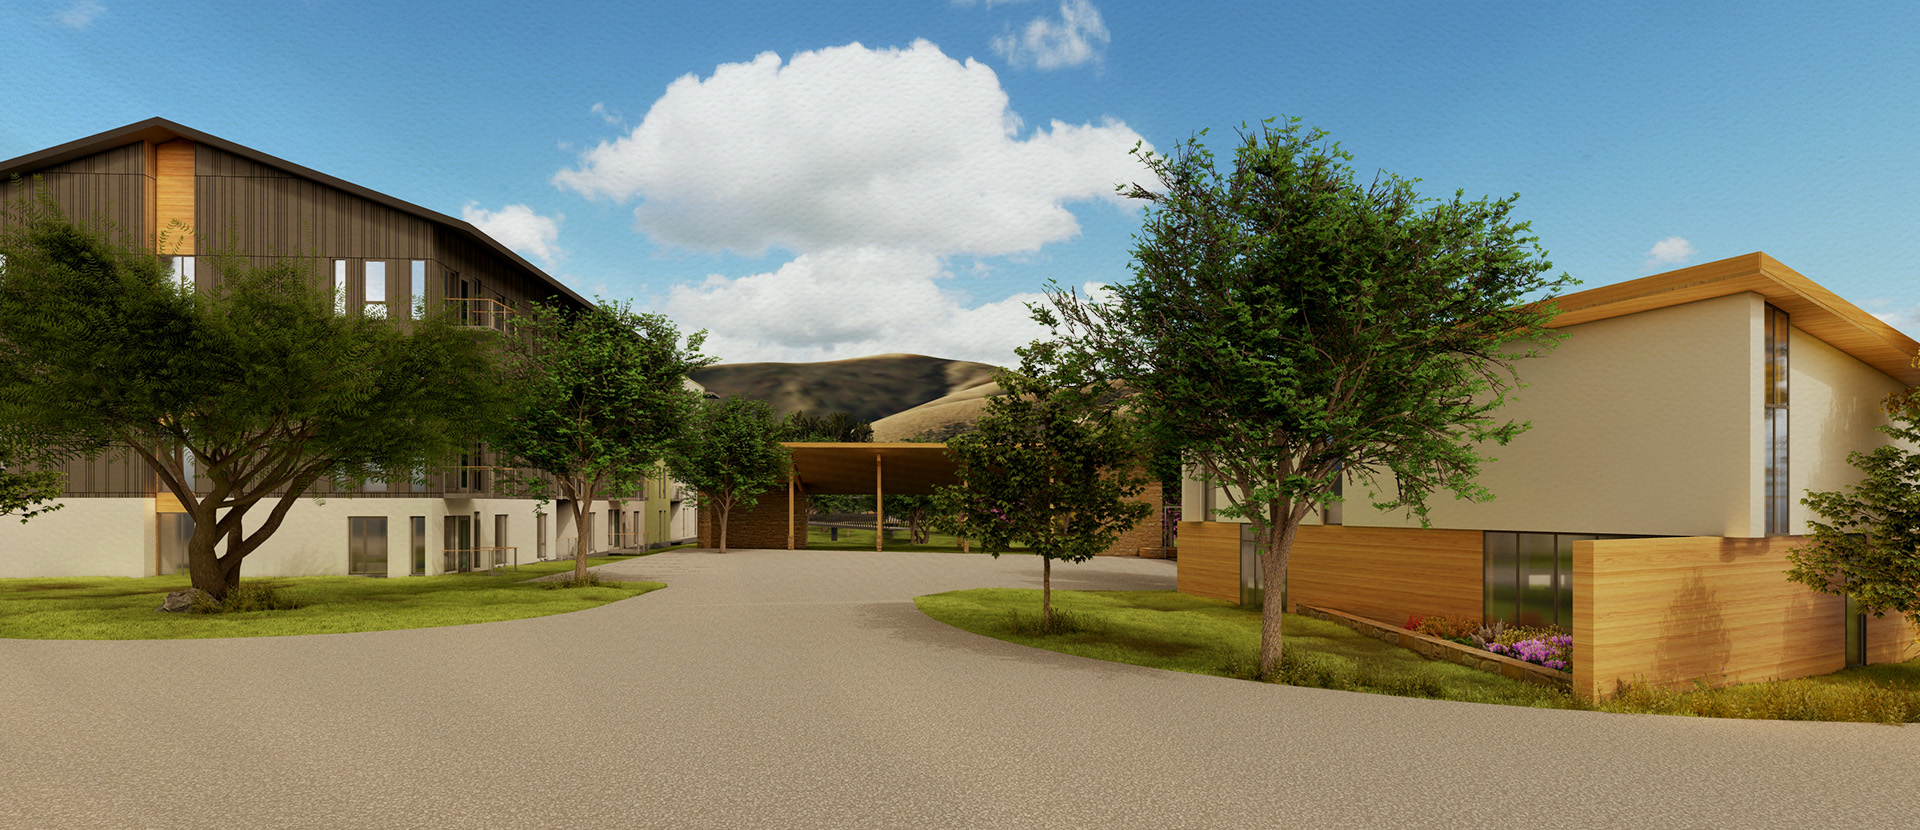 rendering of buildings with hills in the background at Enso Verde in simi valley, california